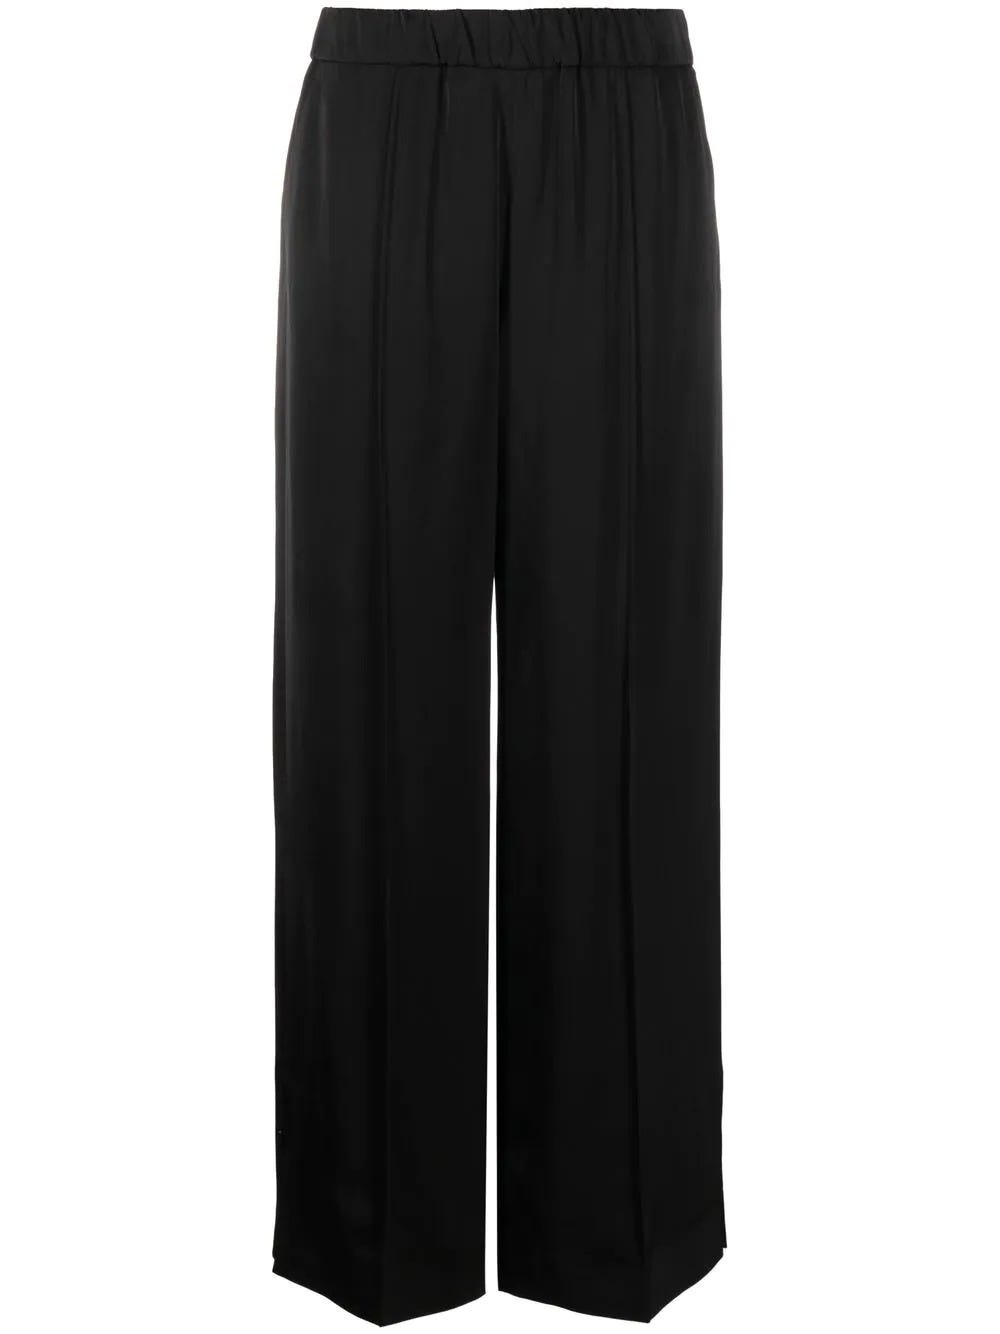 JIL SANDER TAILORED BLACK PALAZZO TROUSERS WITH ELASTICATED WAISTBAND